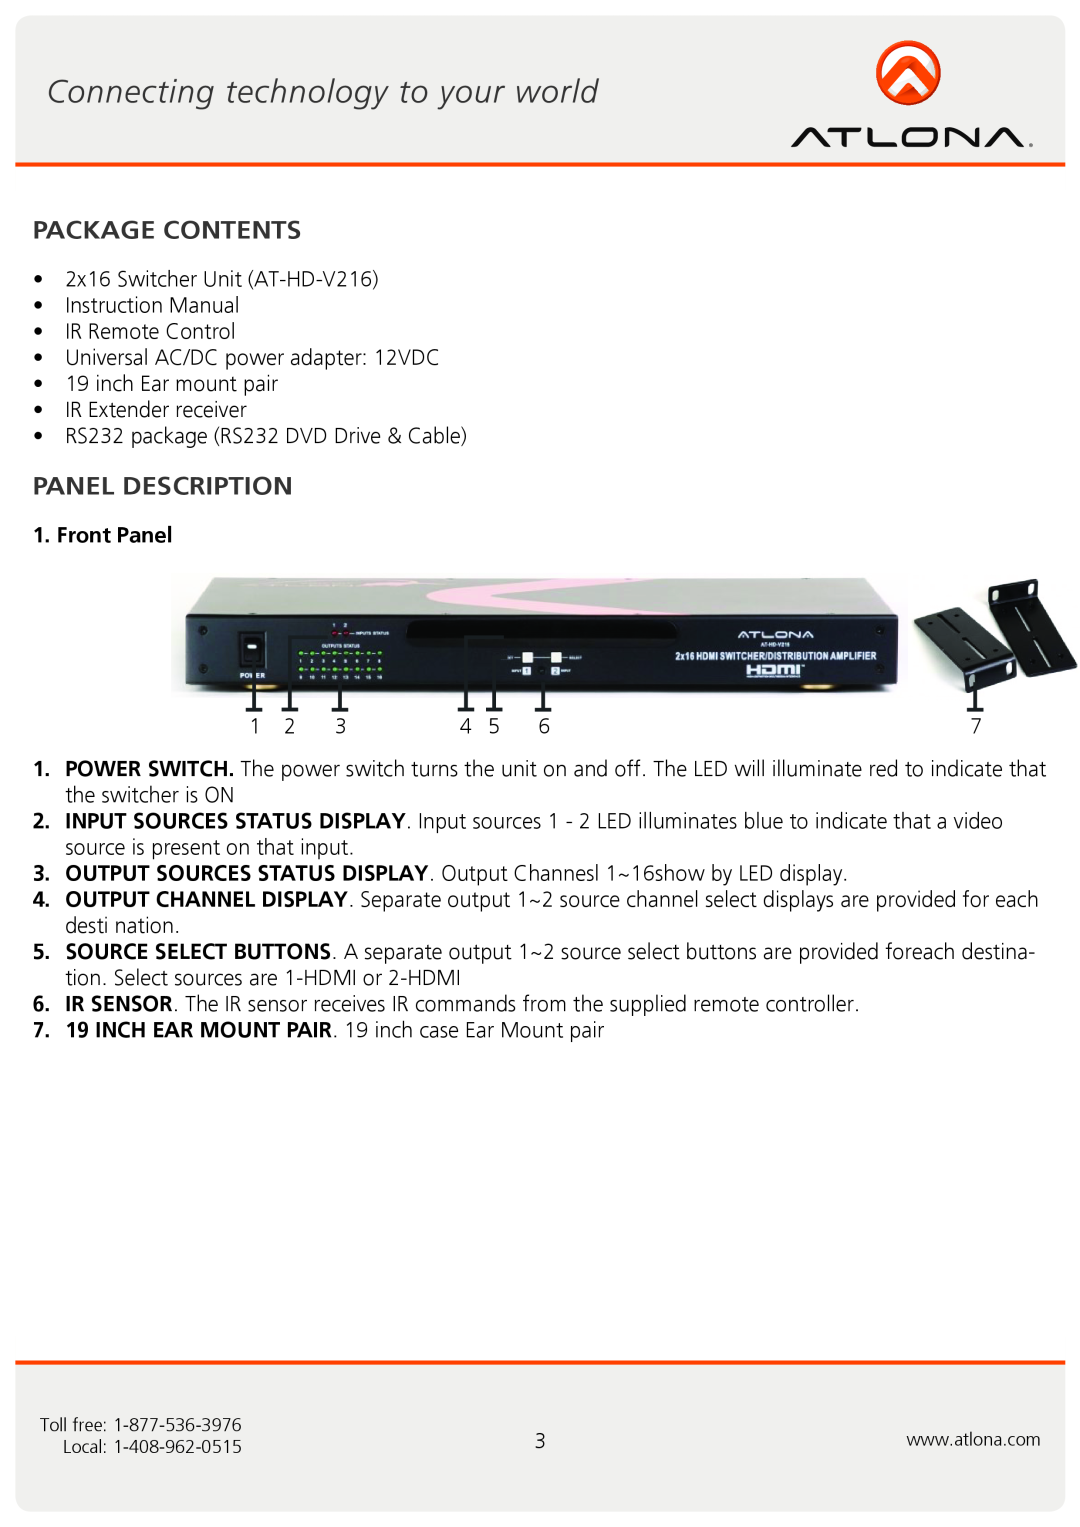 Atlona AT-HD-V216 user manual Package Contents, Panel Description, Front Panel 